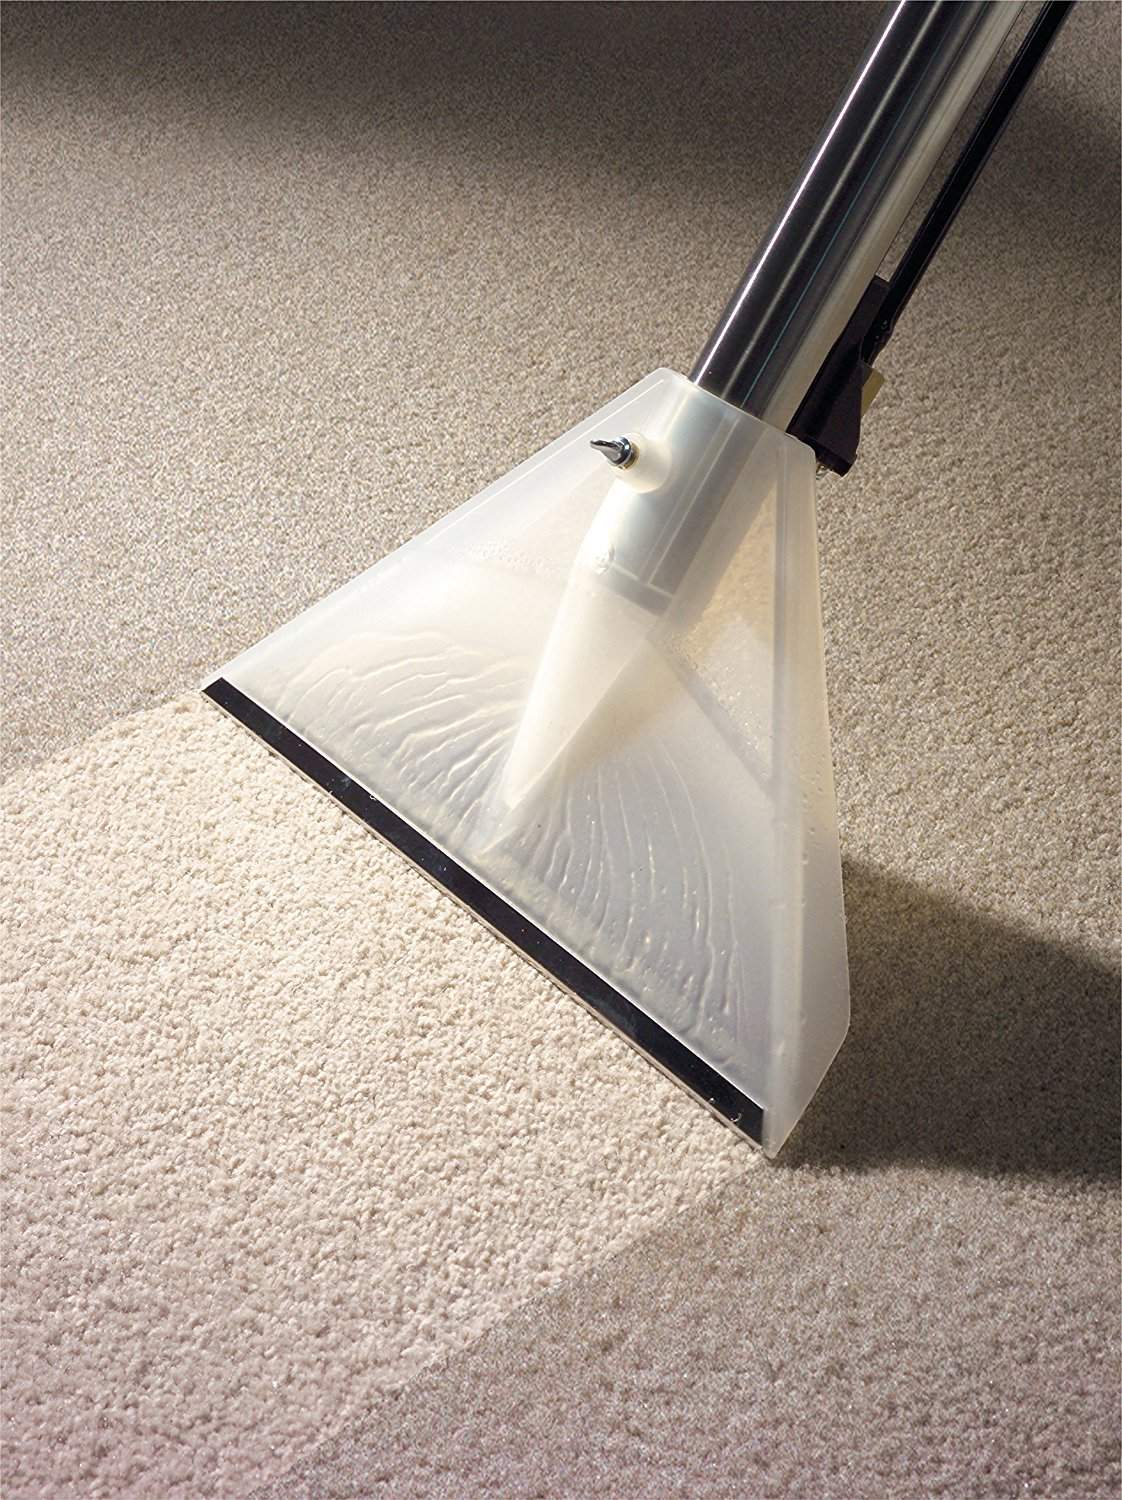 George cleaning carpet